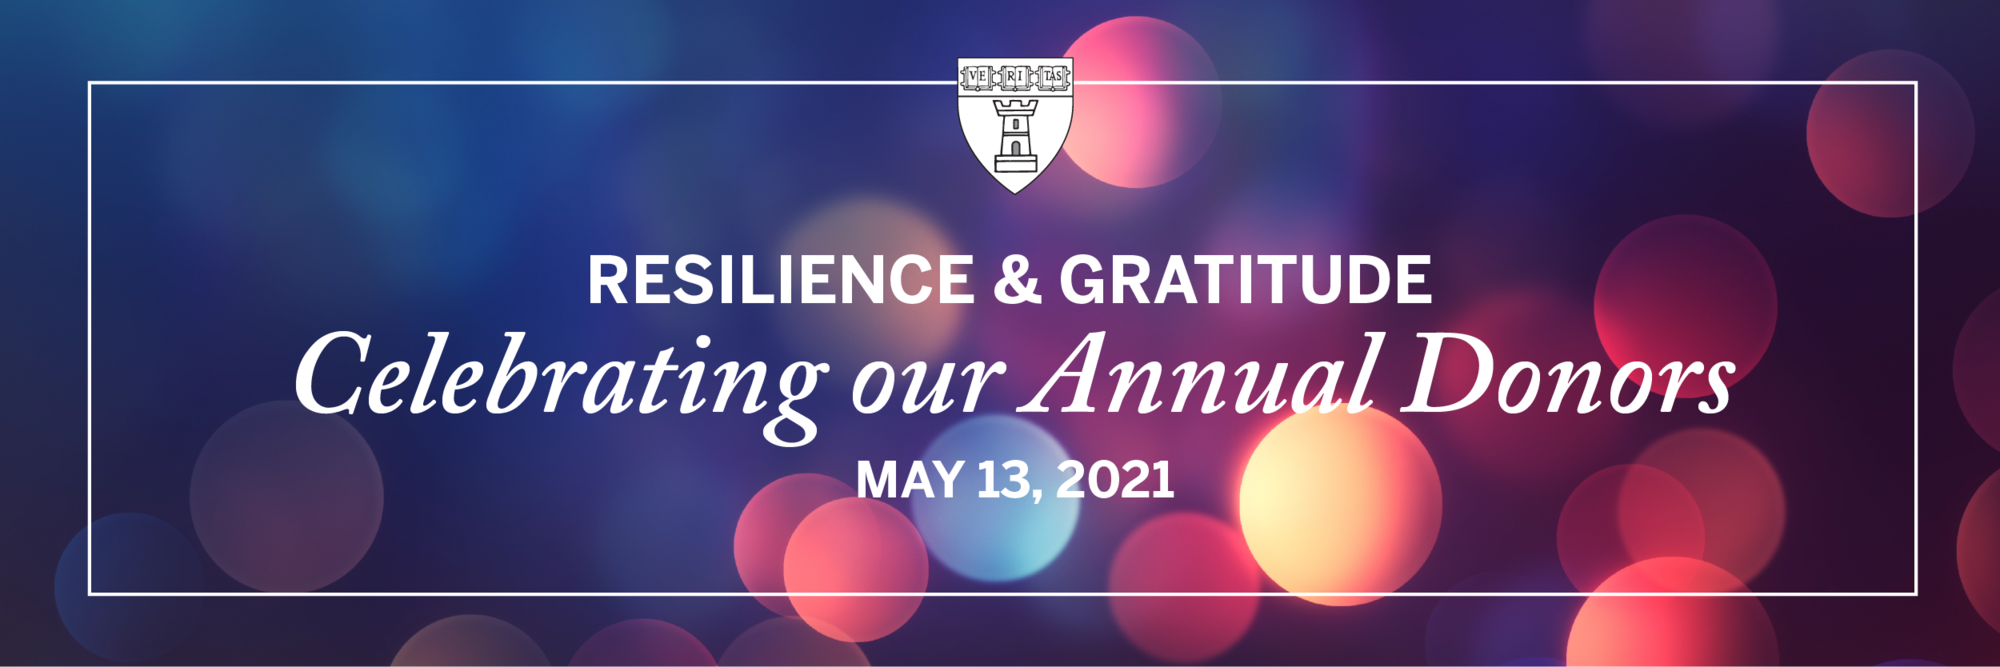 Resilience & Gratitue: Celebrating Our Annual Donors